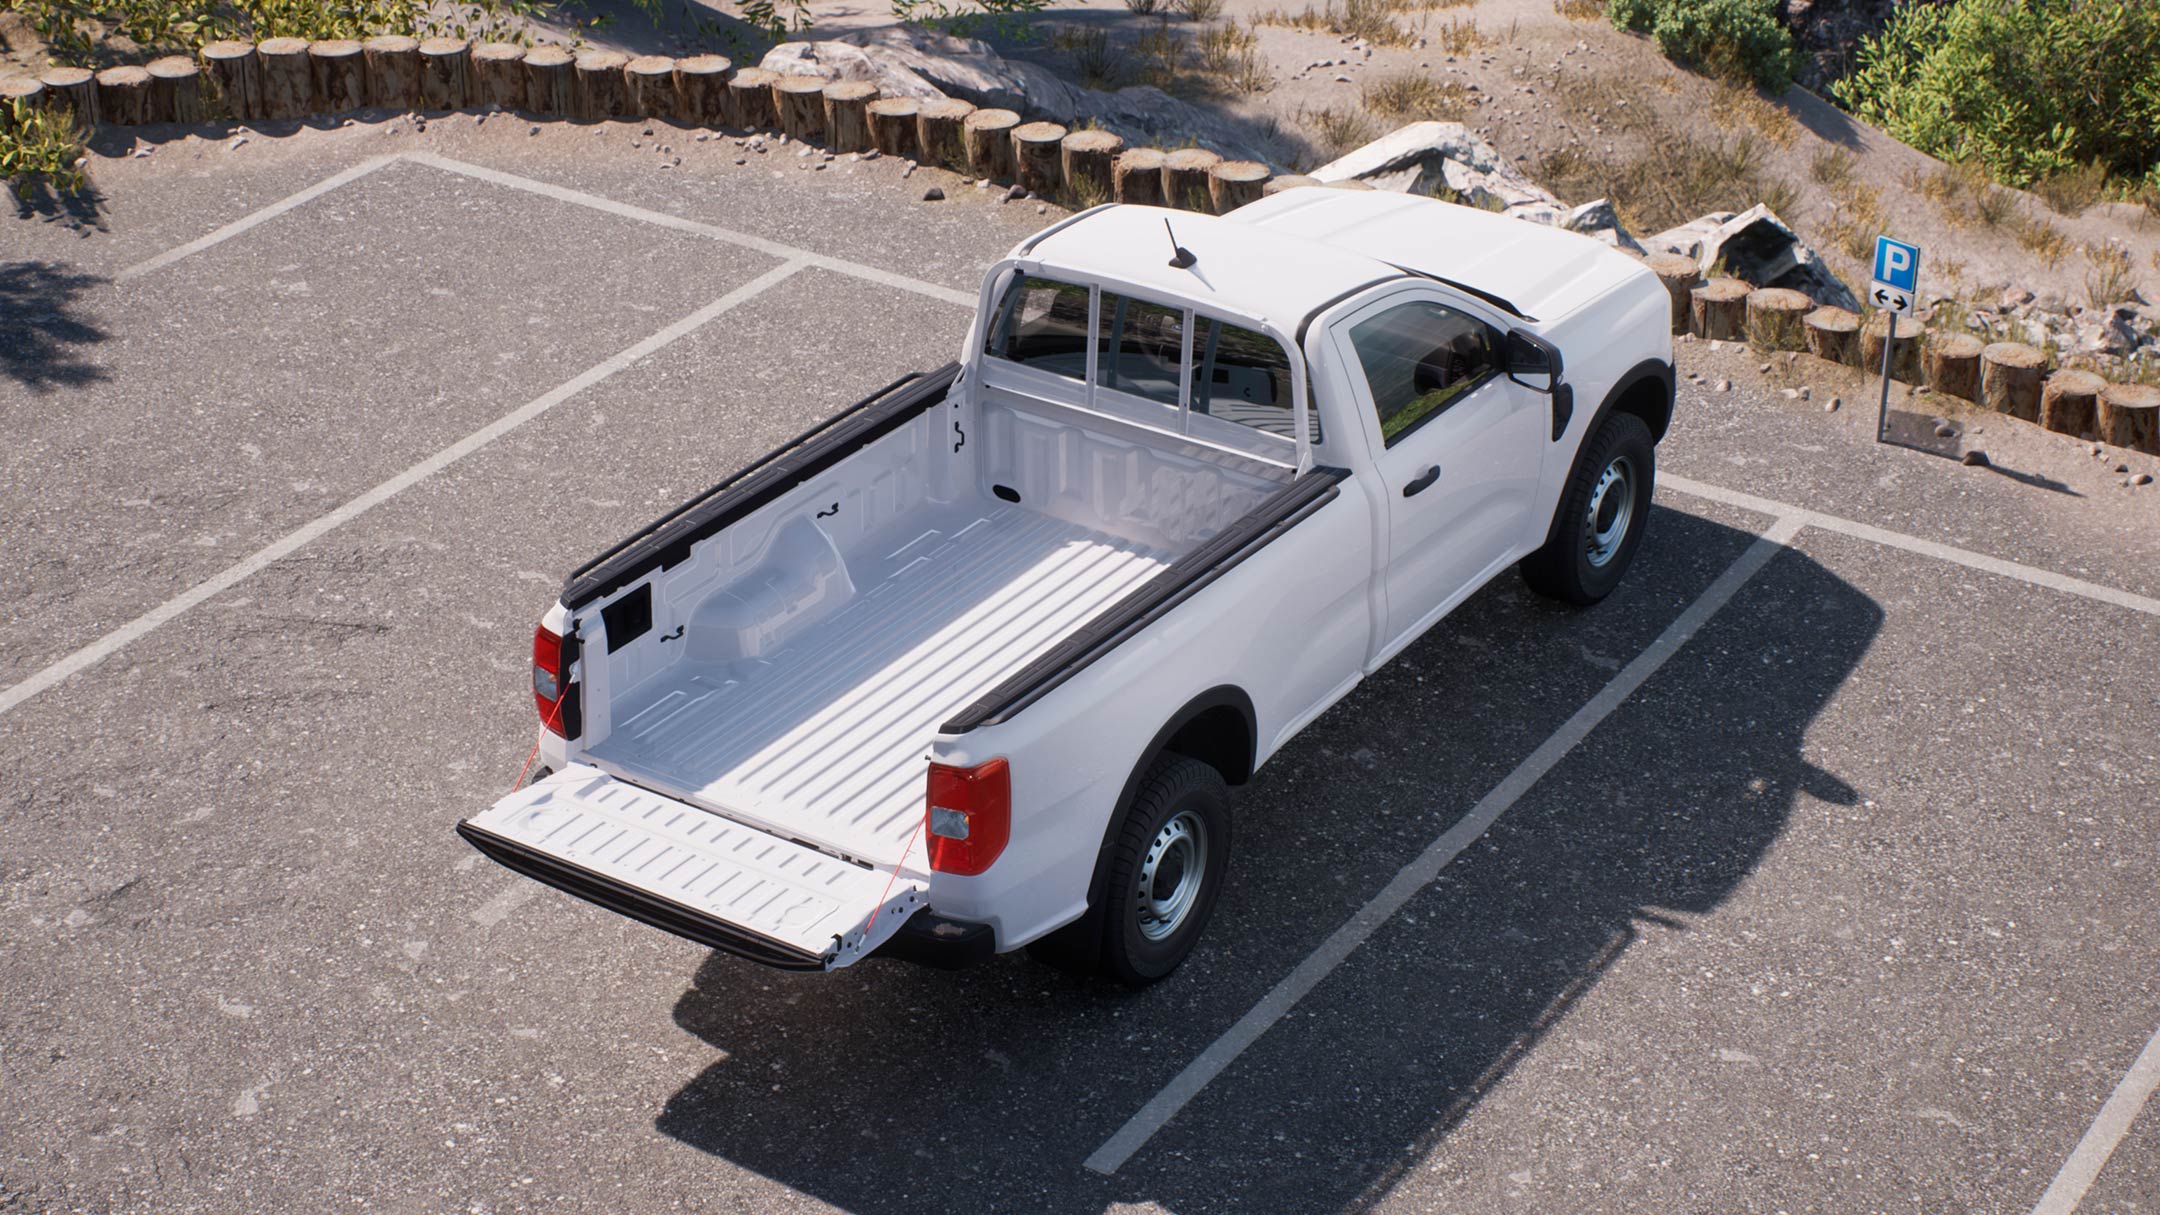 Ford Ranger frozen white 3/4 rear view from above showing load bed